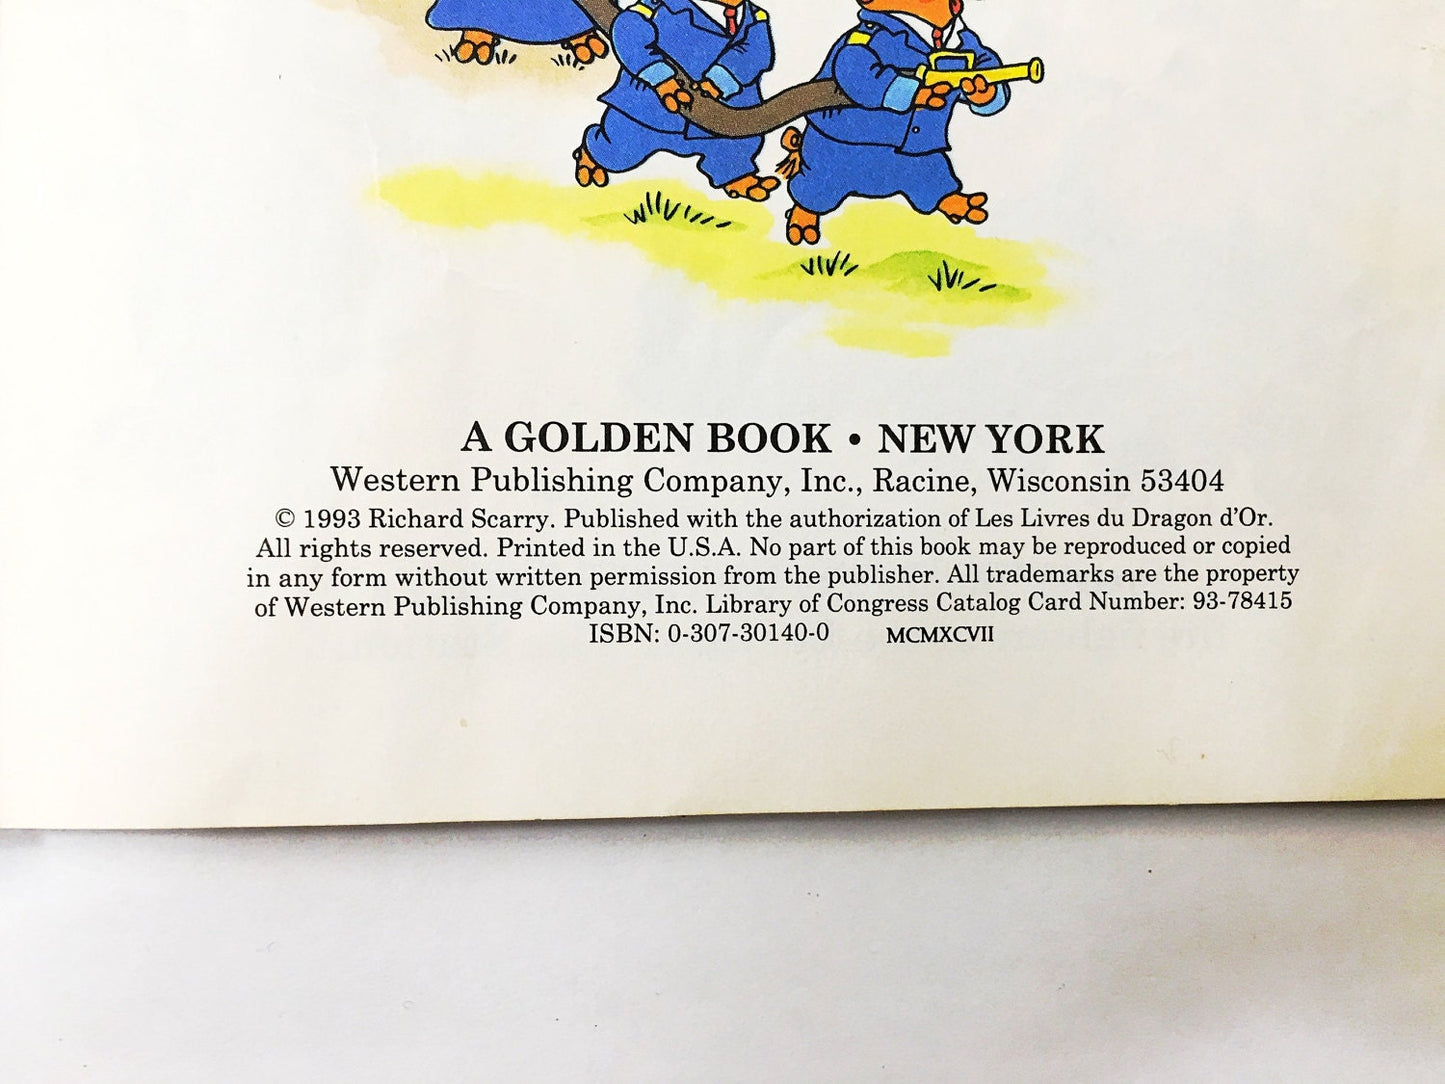 1993 Richard Scarry's Busiest Fire Fighters Ever! Vintage FIRST EDITION Little Golden Book. 93-78415. Vintage Collectible Hardback Book.